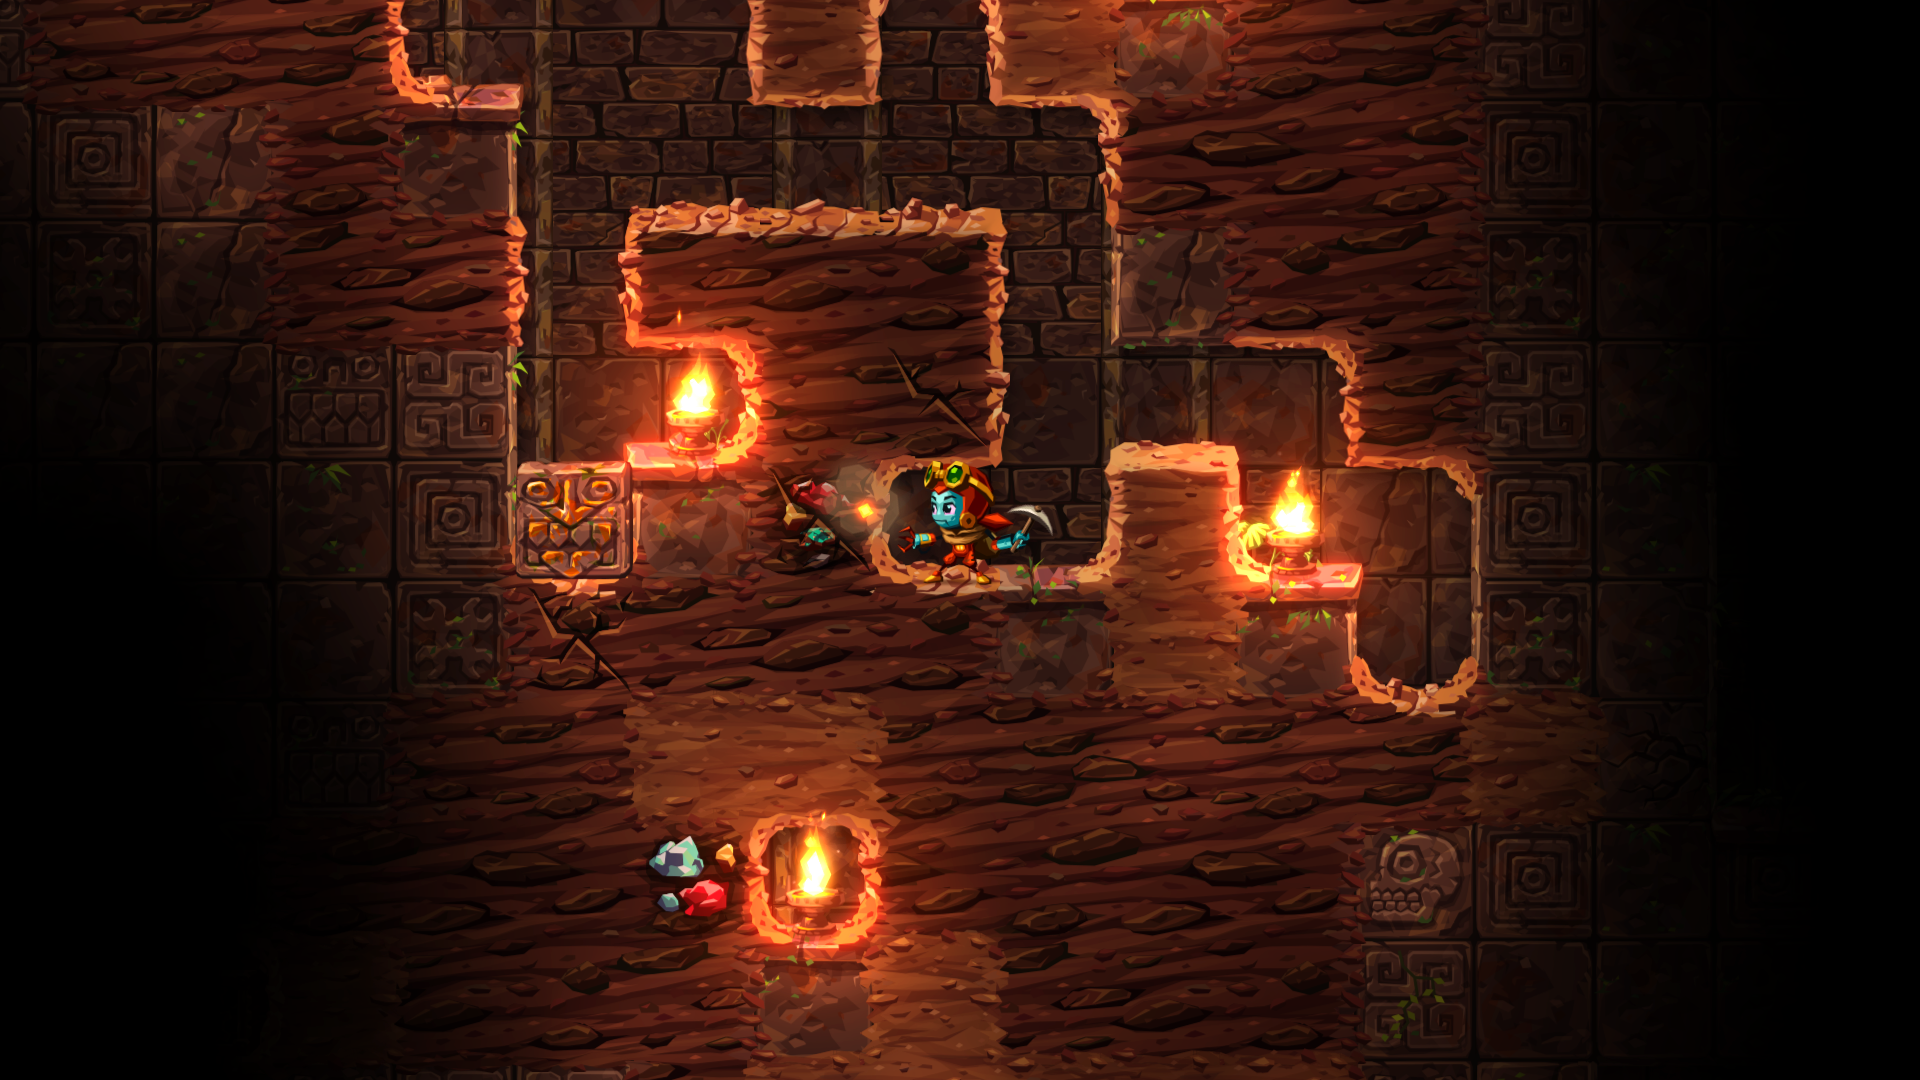 HD desktop wallpaper featuring a scene from SteamWorld Dig 2 with a robotic character mining in a torch-lit underground setting.